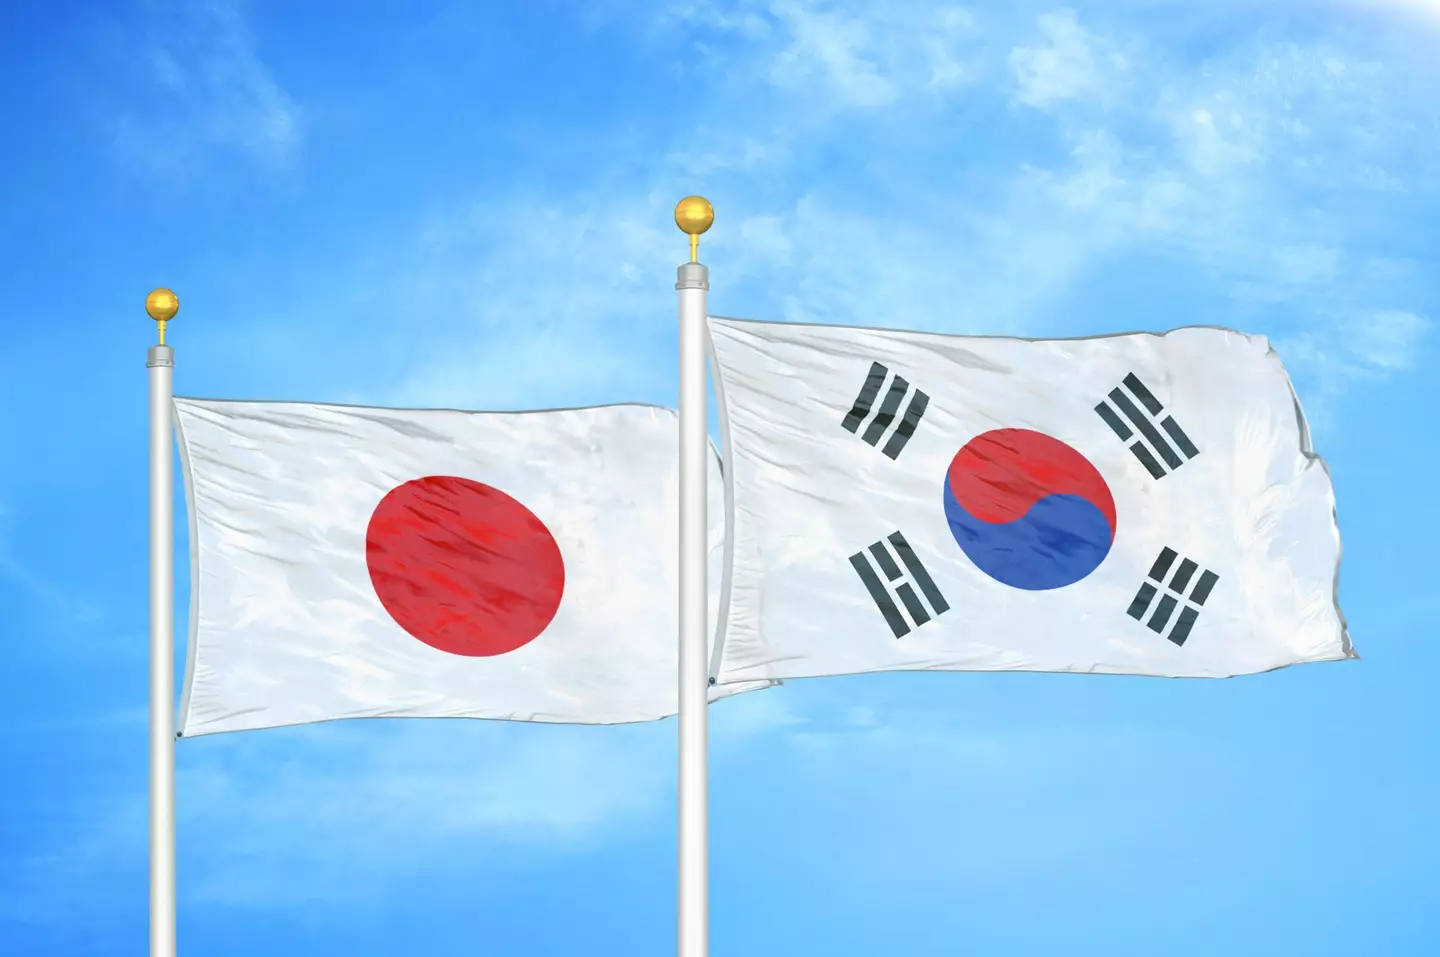 One of these is the Japanese flag, the other one is not.